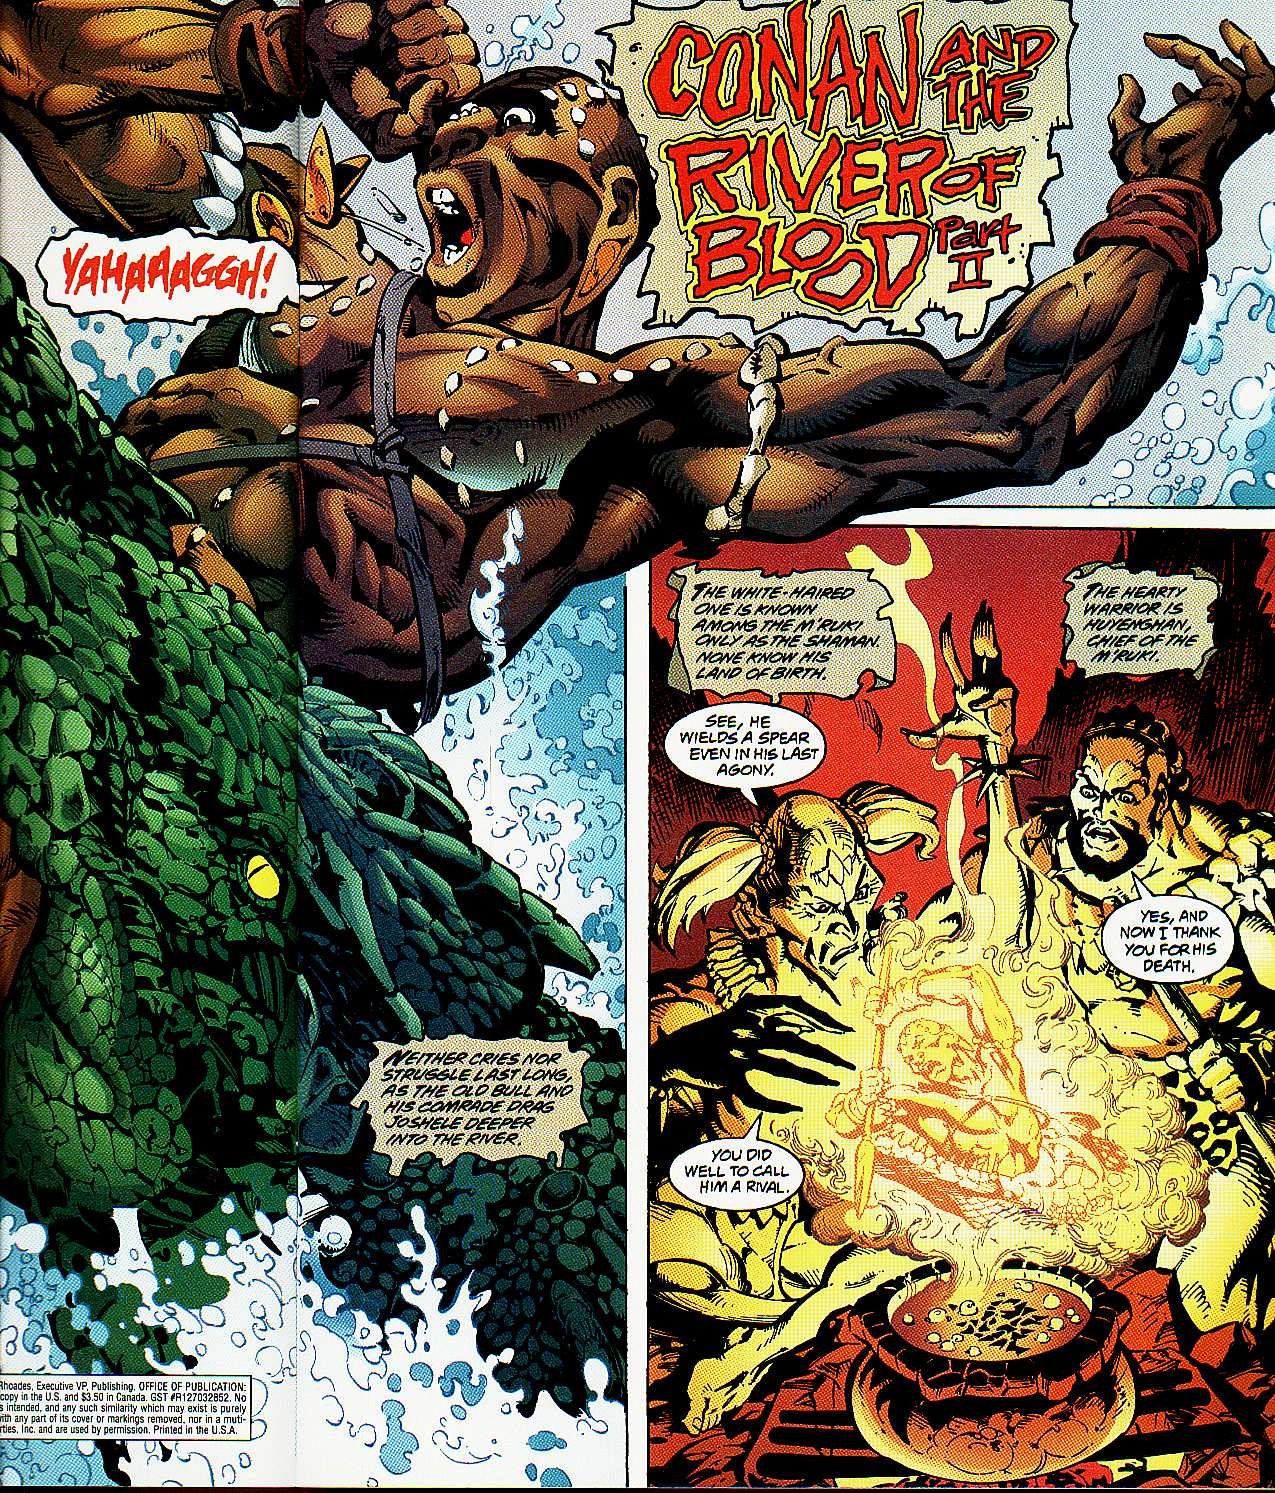 Read online Conan the Barbarian: River of Blood comic -  Issue #2 - 6